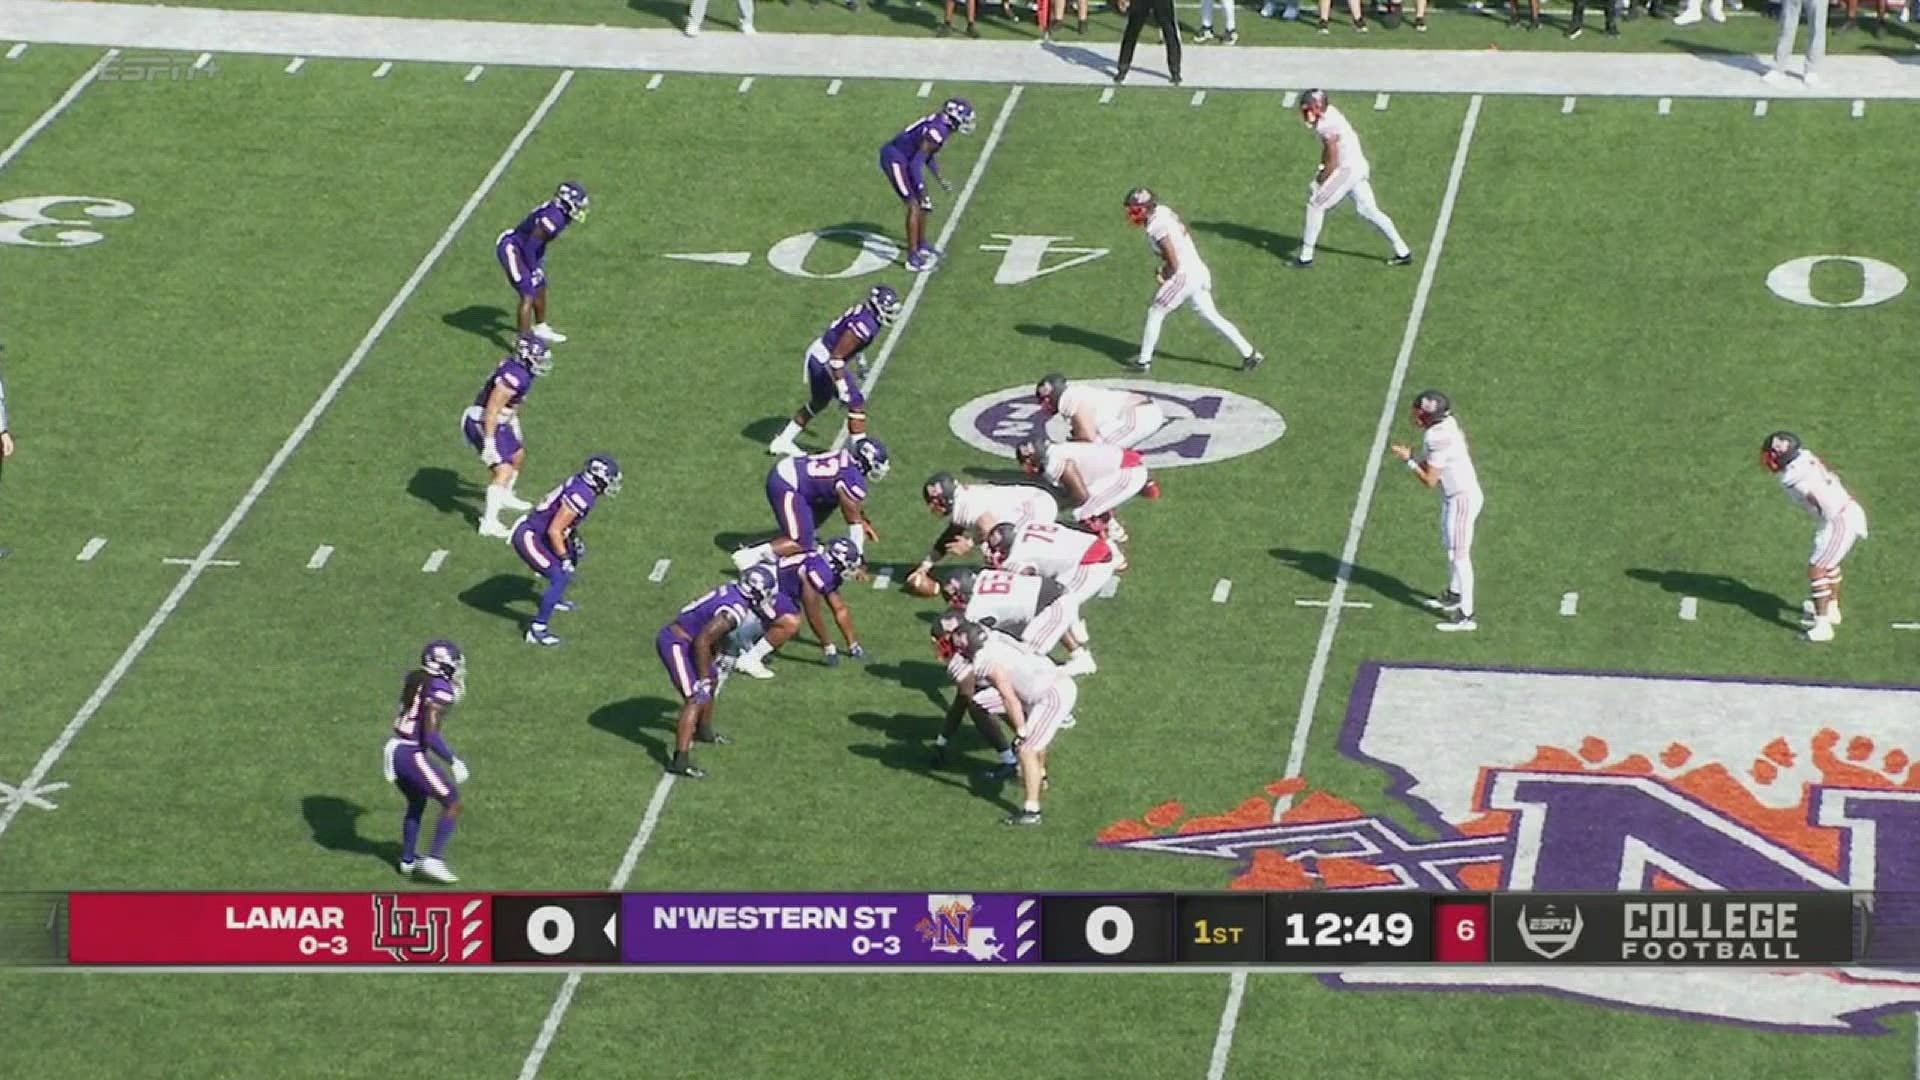 Northwestern State rallies in the second quarter to beat Lamar in the Cardinals first game back in the Southland.